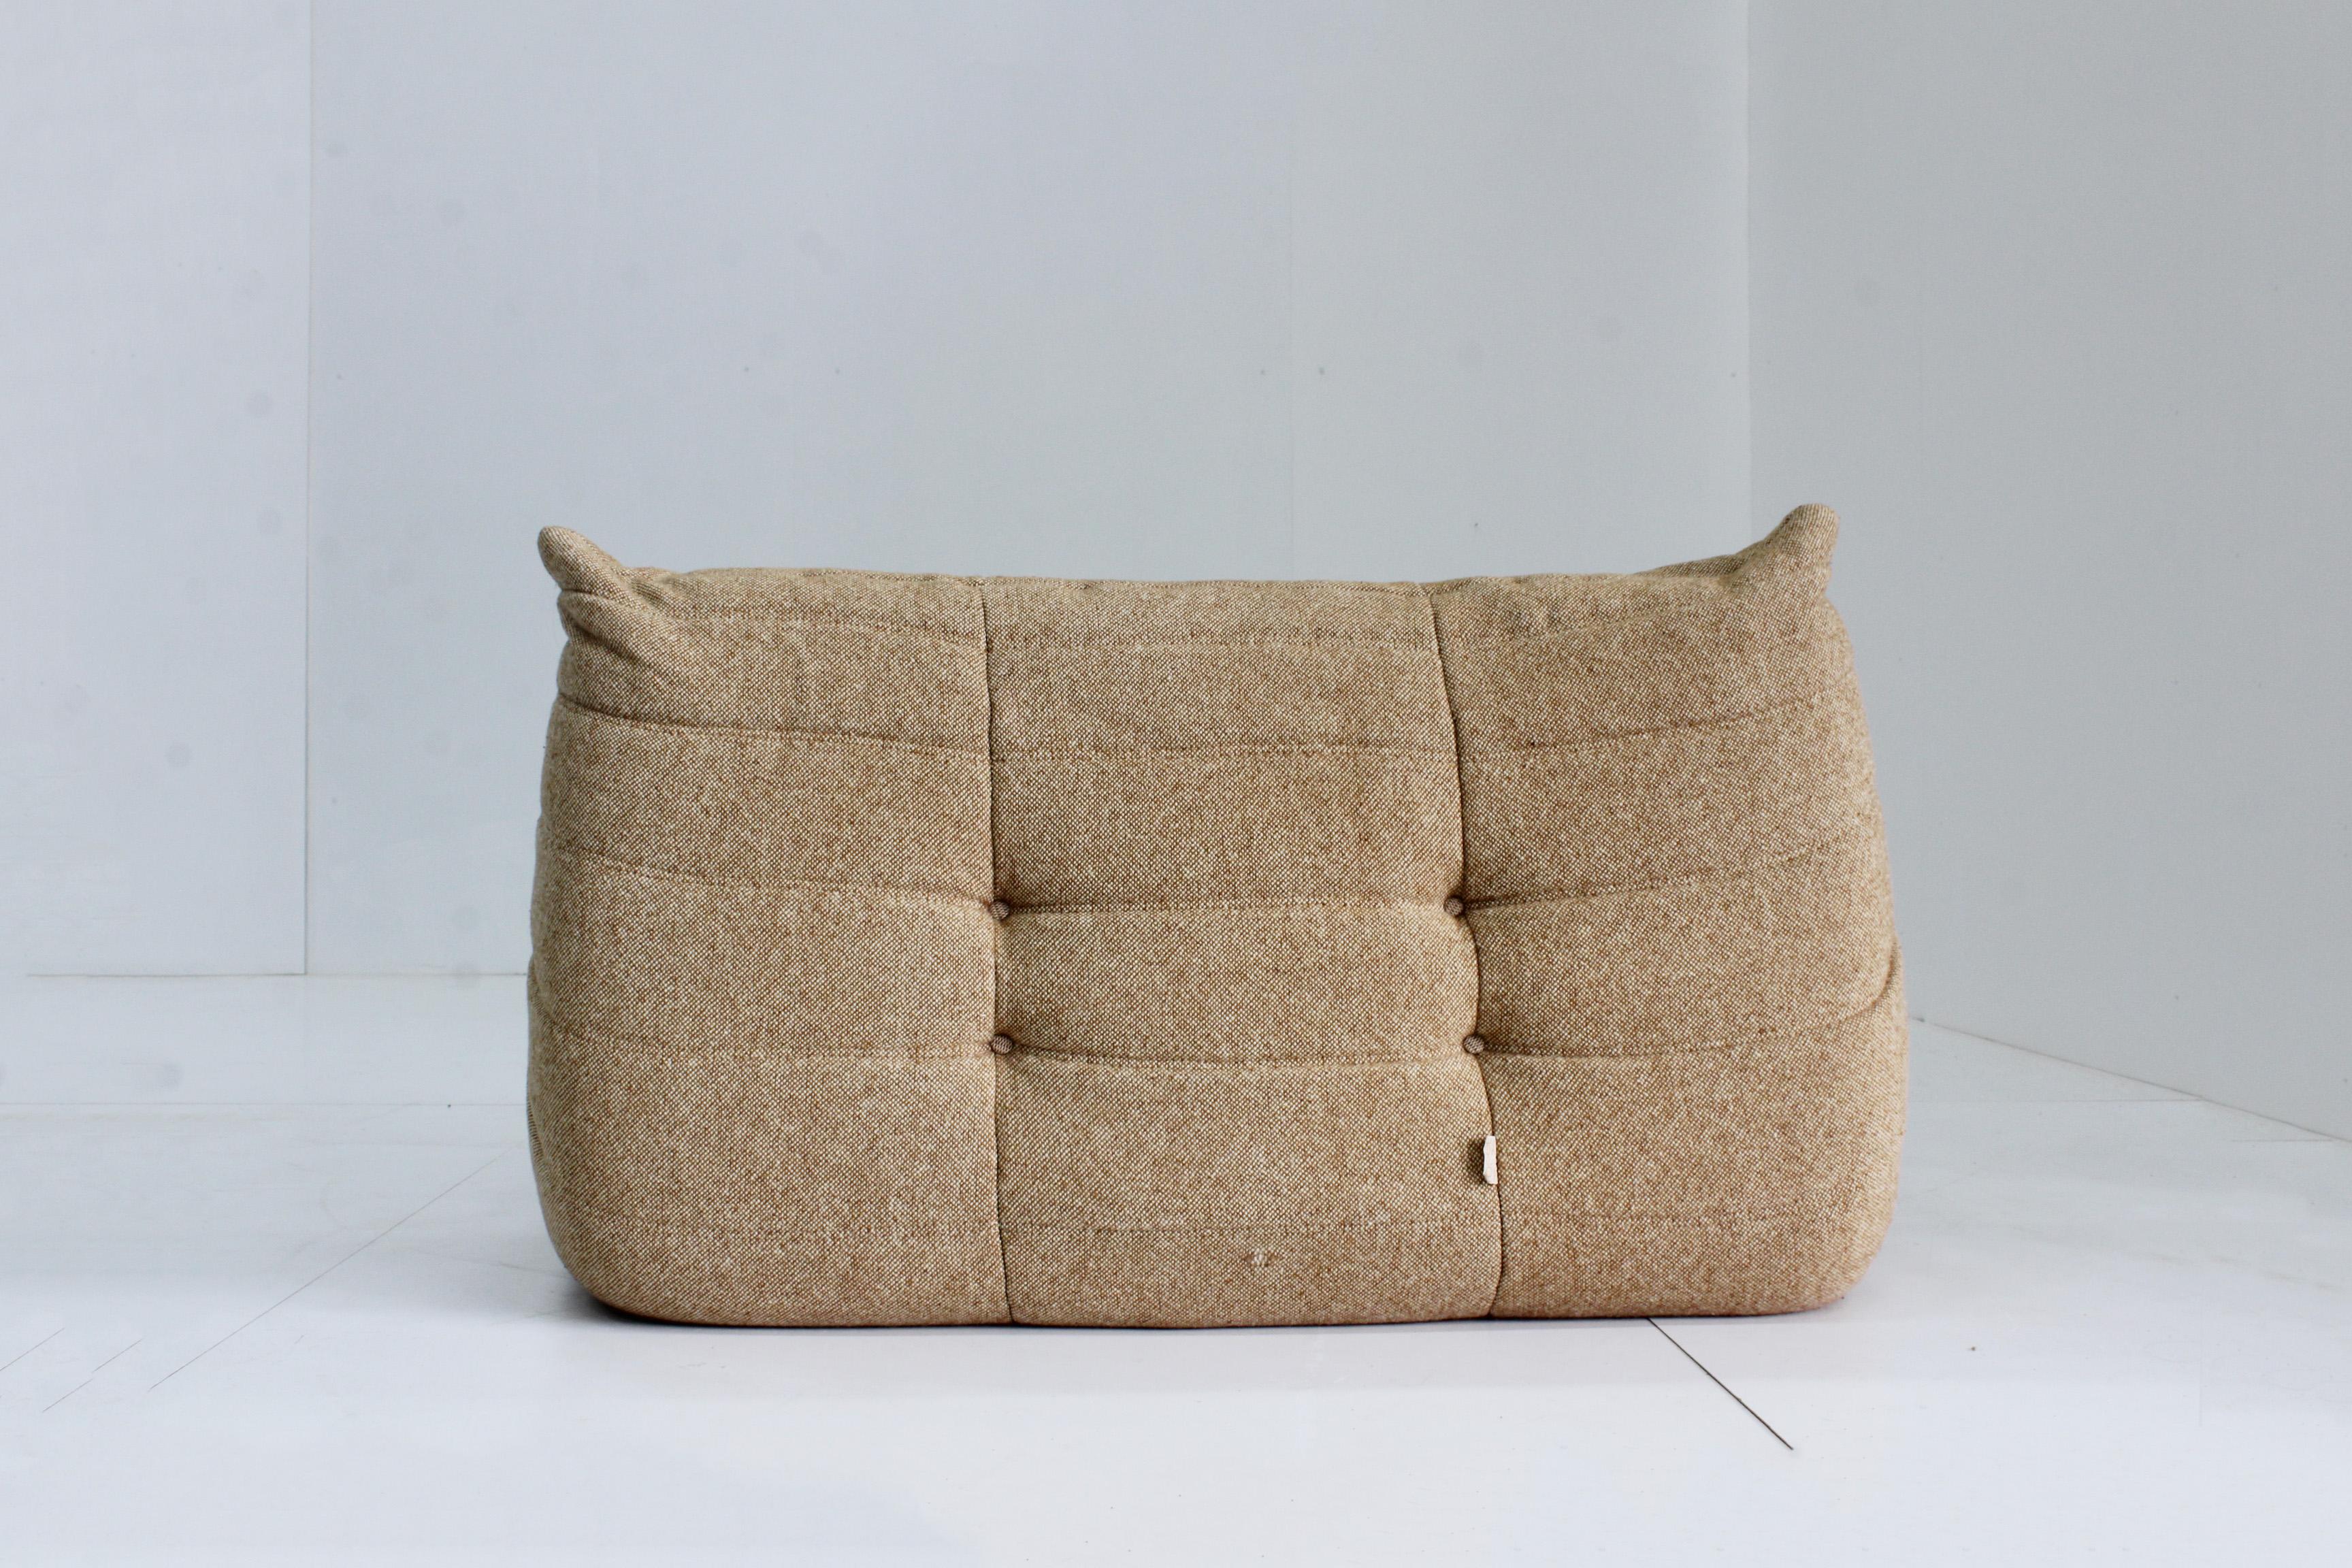 Vintage early edition togo in a beautiful linen and cotton fabric. Beautiful high quality fabric and textures in sand/ beige linen and cotton blend. The fabric as well as the sofa are in a very good condition.

The fabric has been professionally